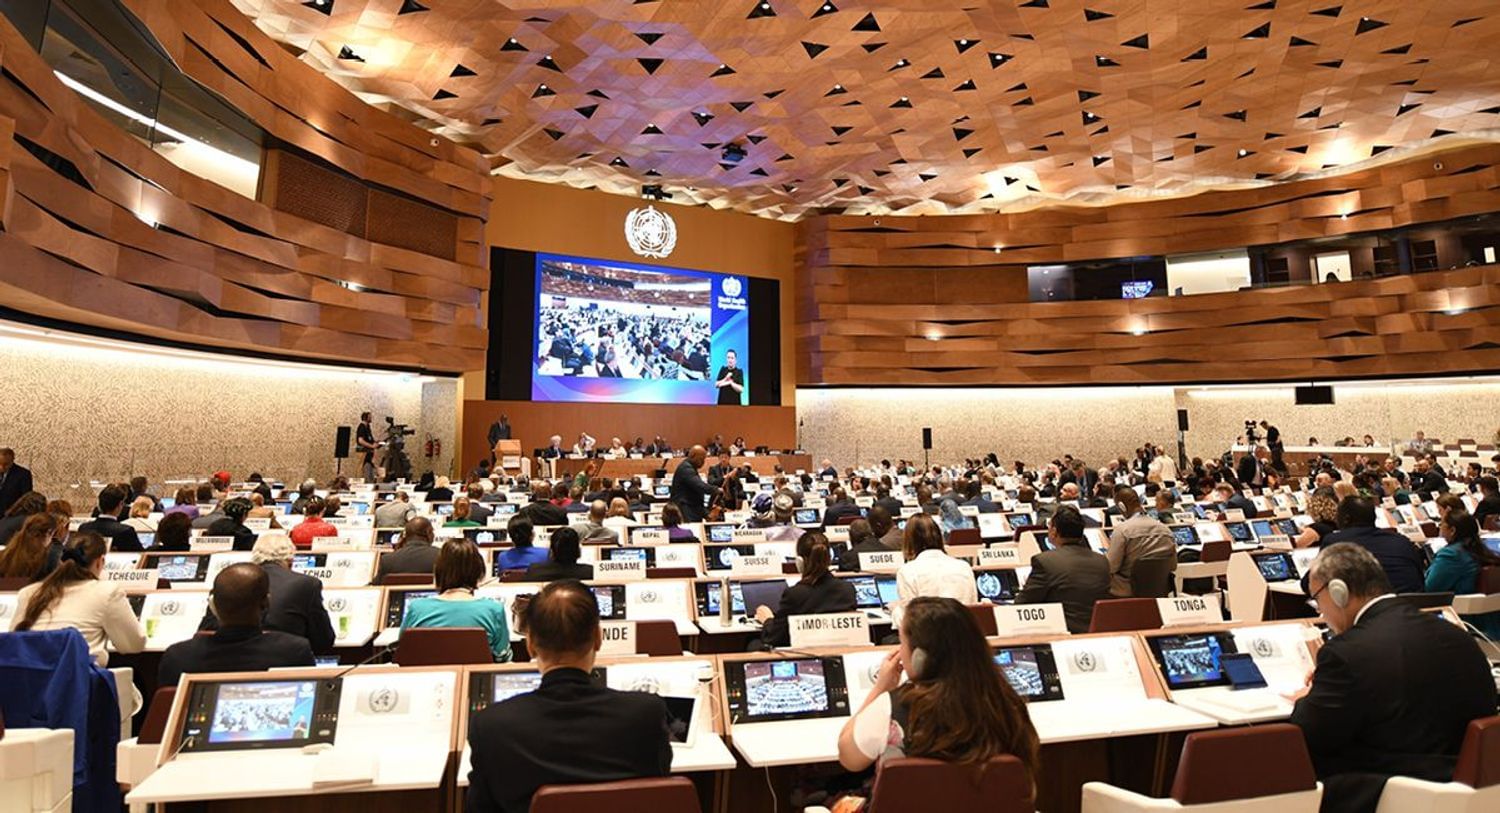 Delegates seated in the main hall at the forum